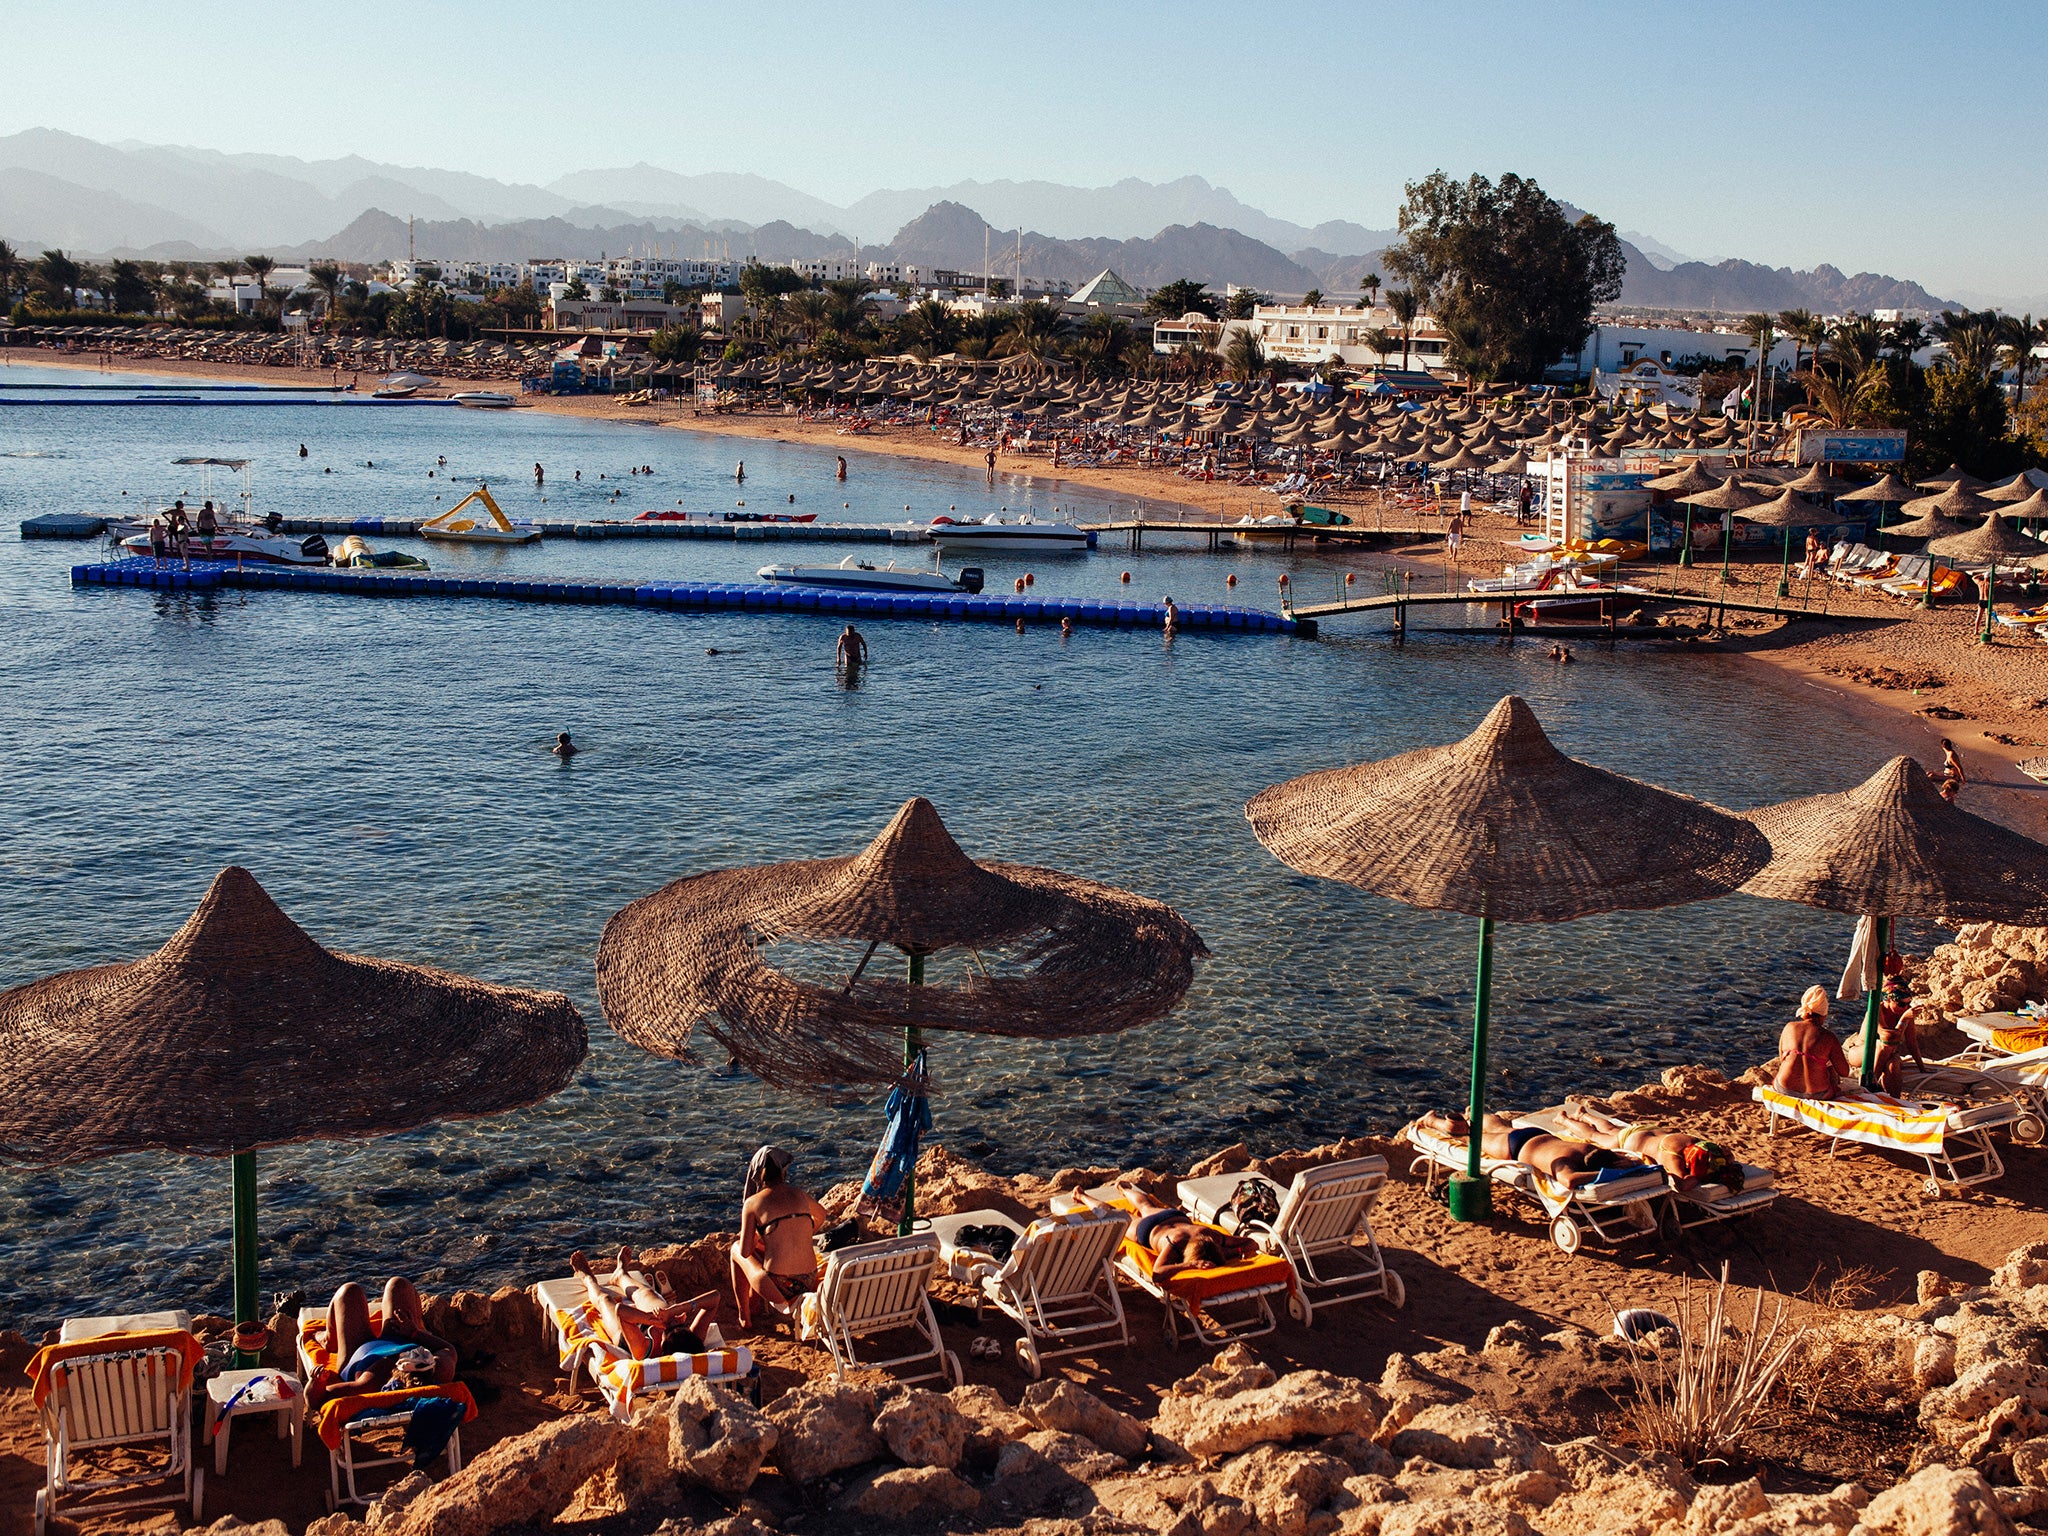 People relax on beach chairs at a beach in the Red Sea resort town of Sharm El Sheikh